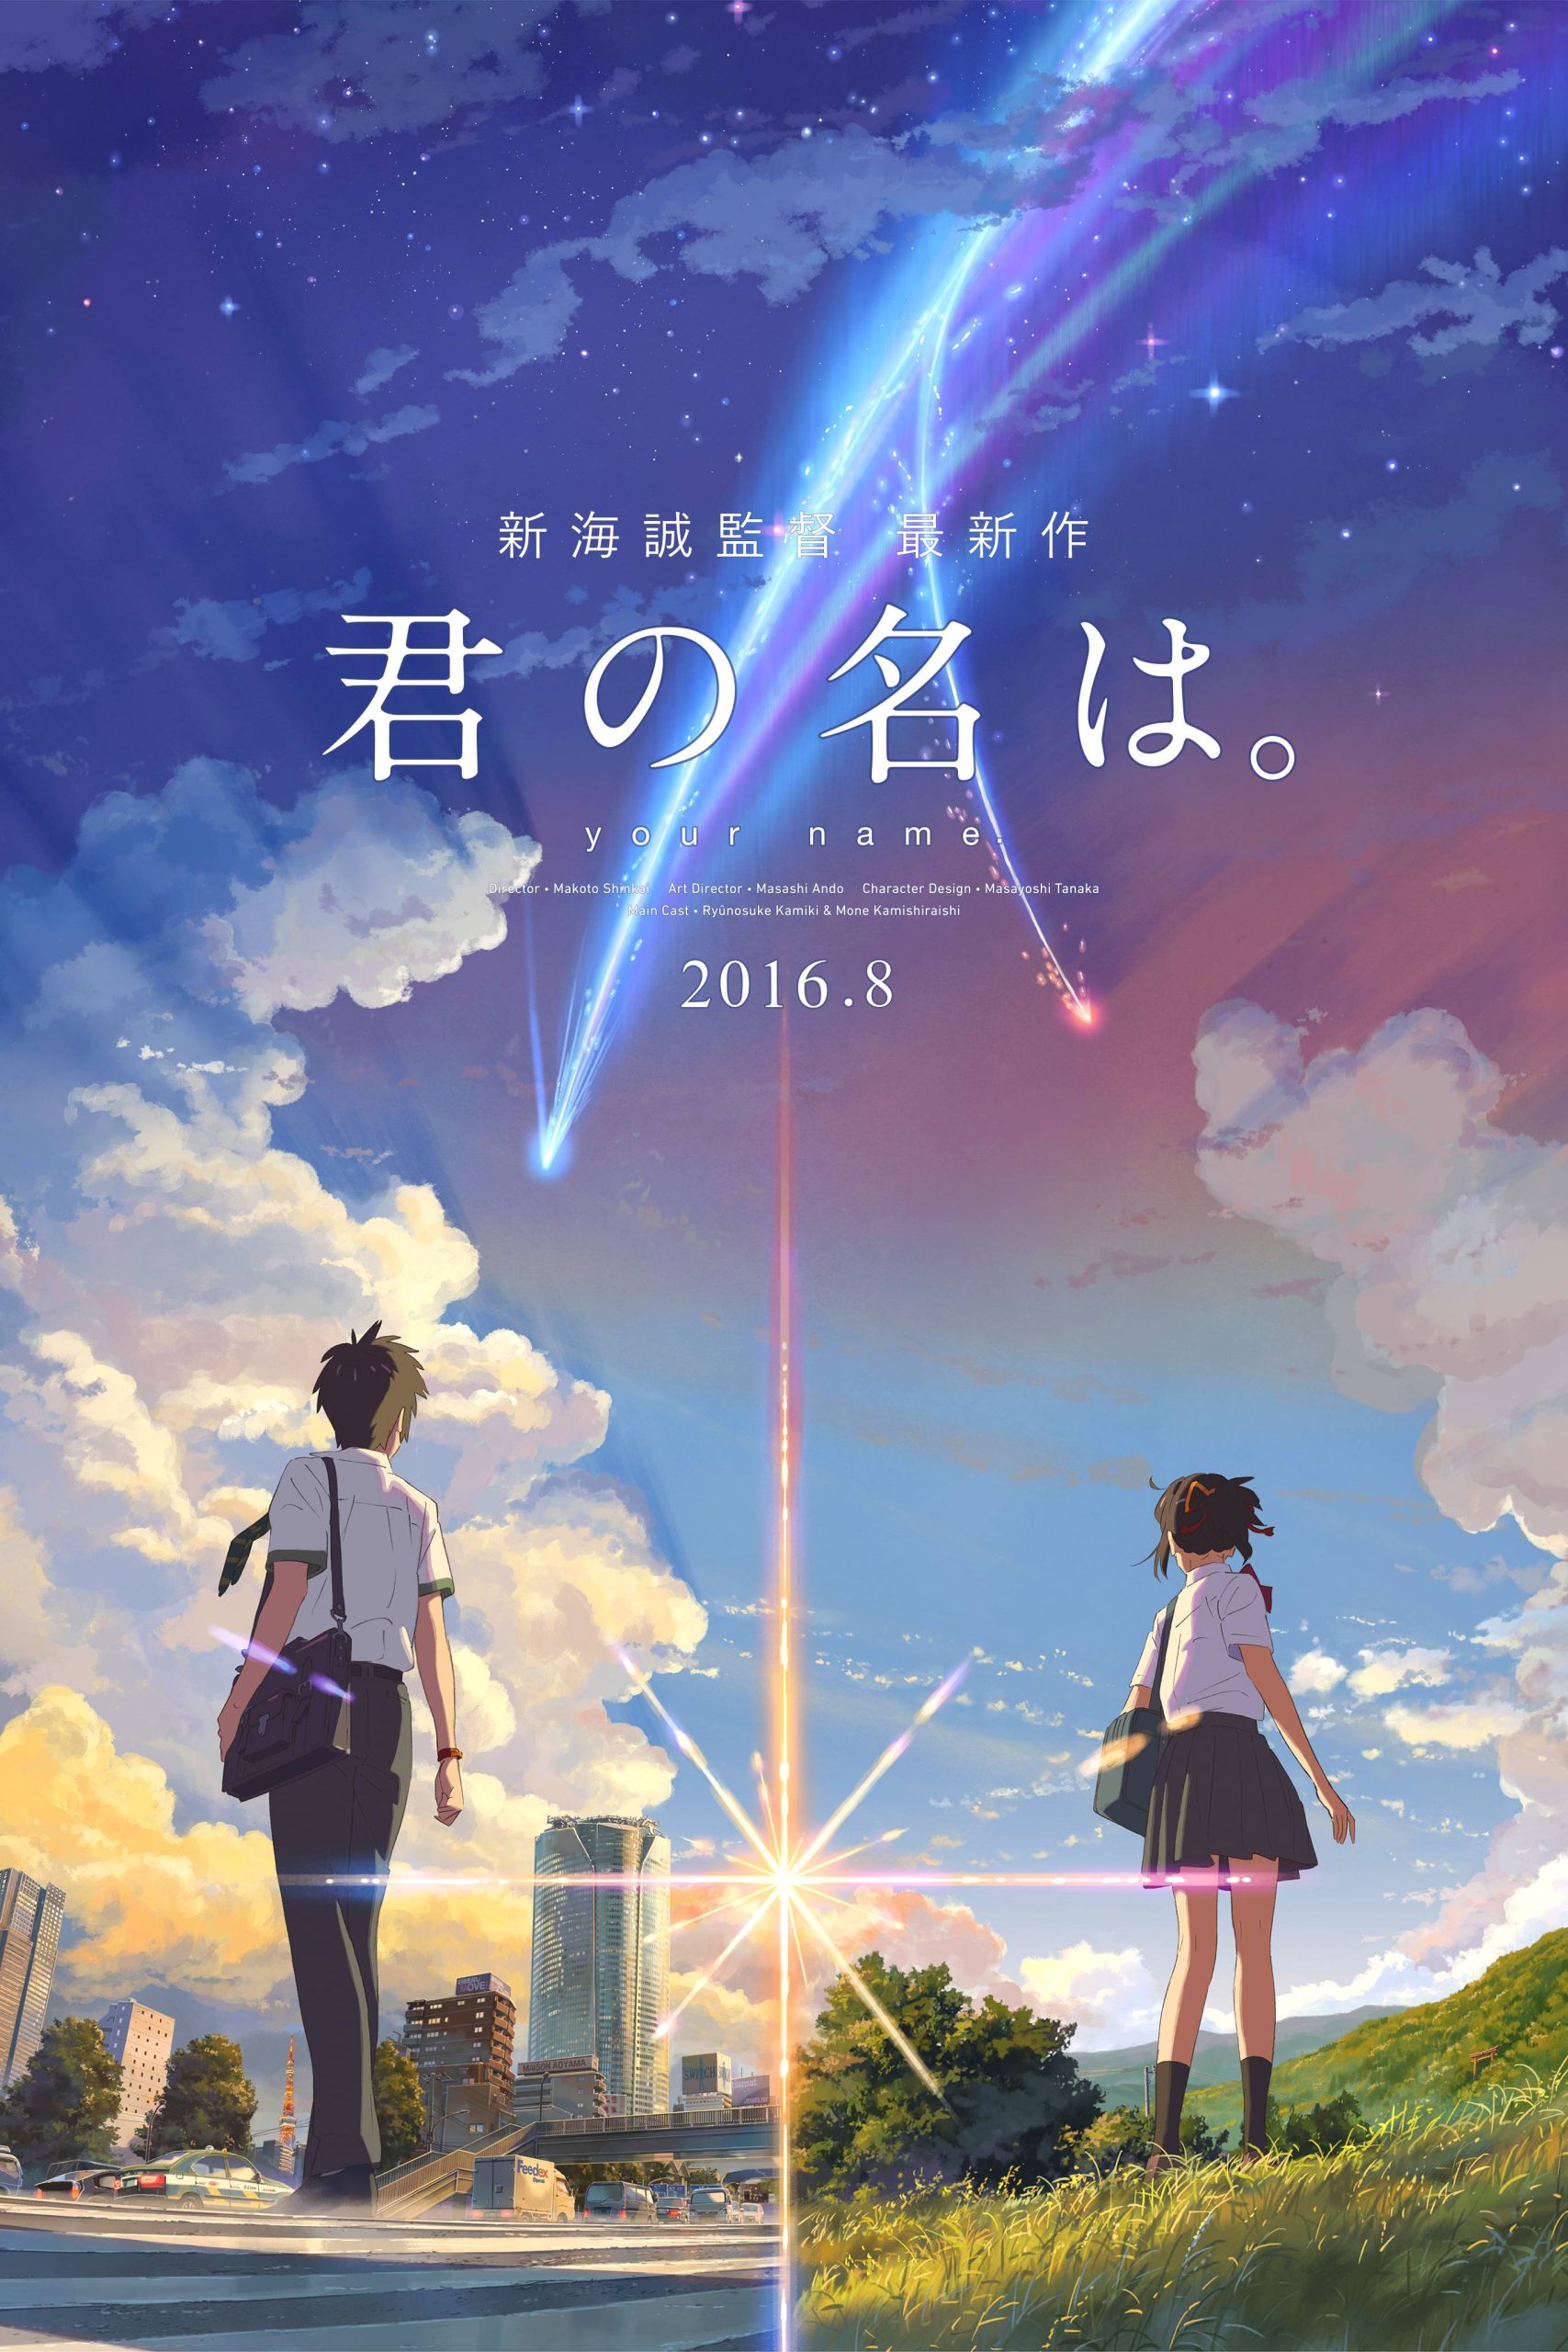 Reviewed by HarperP] Your name – HarperP.